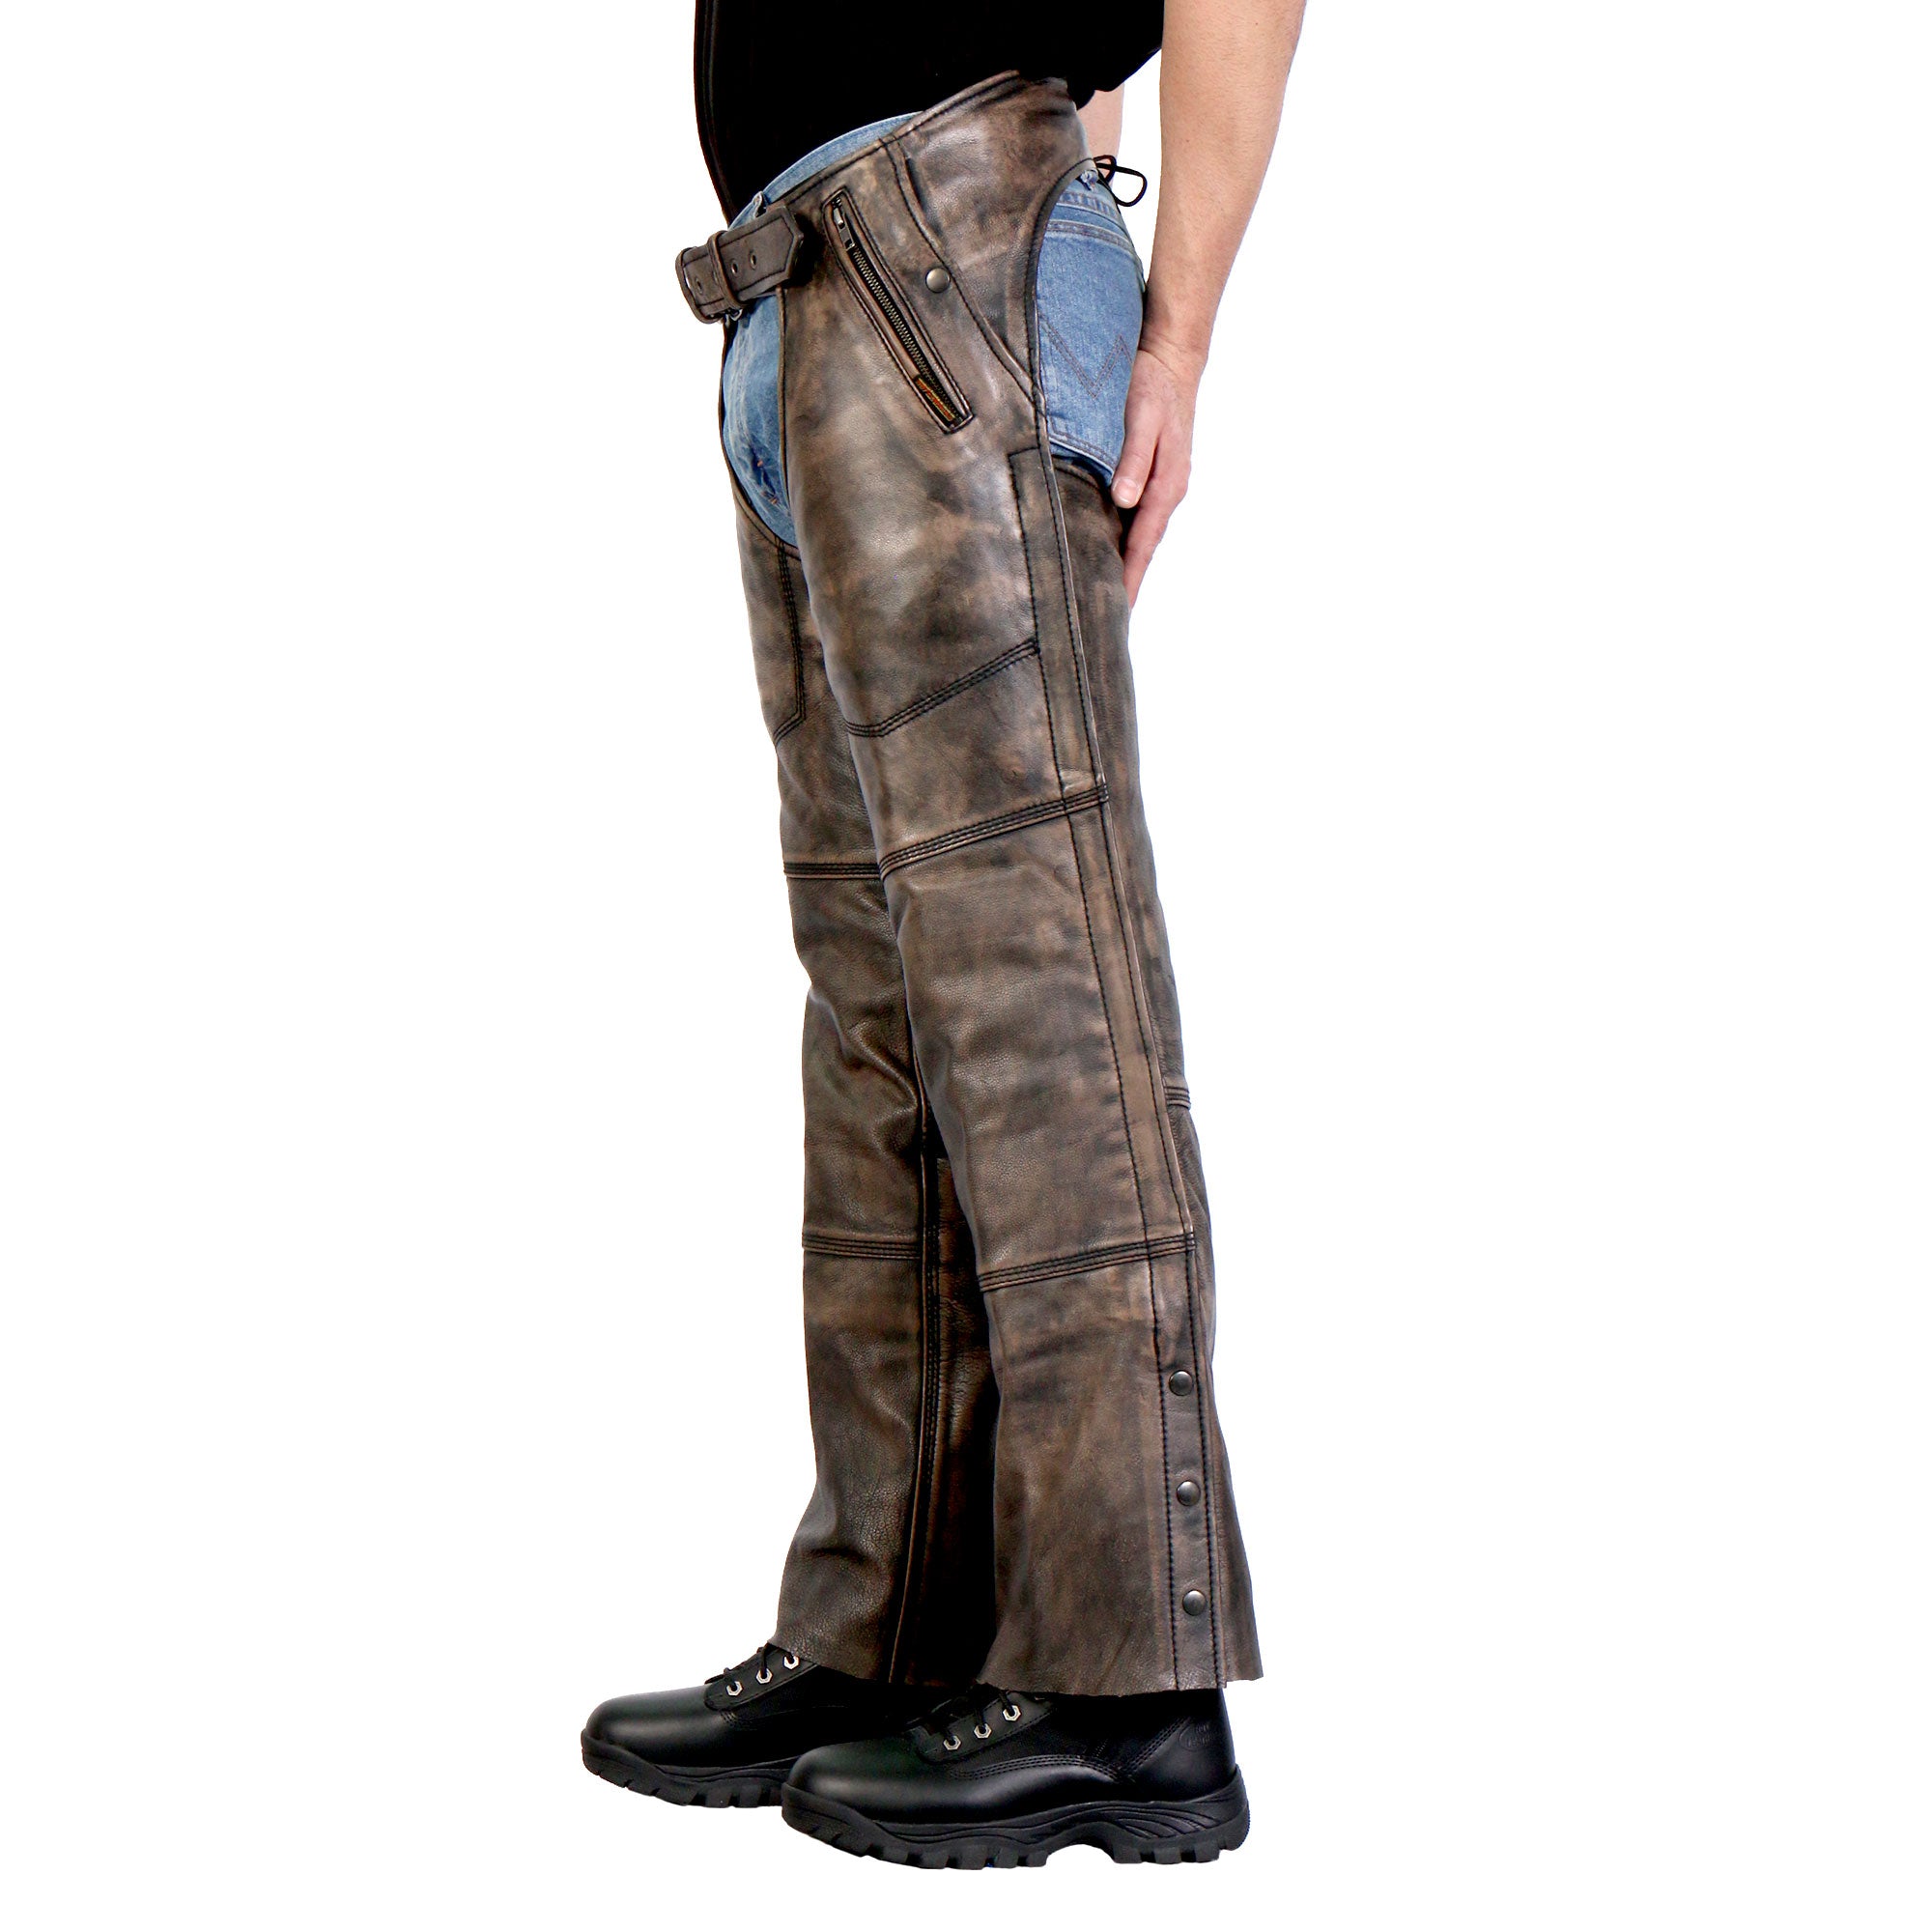 Hot Leathers CHM1008 Unisex Motorcycle style Distressed Brown Premium Leather Biker Chaps